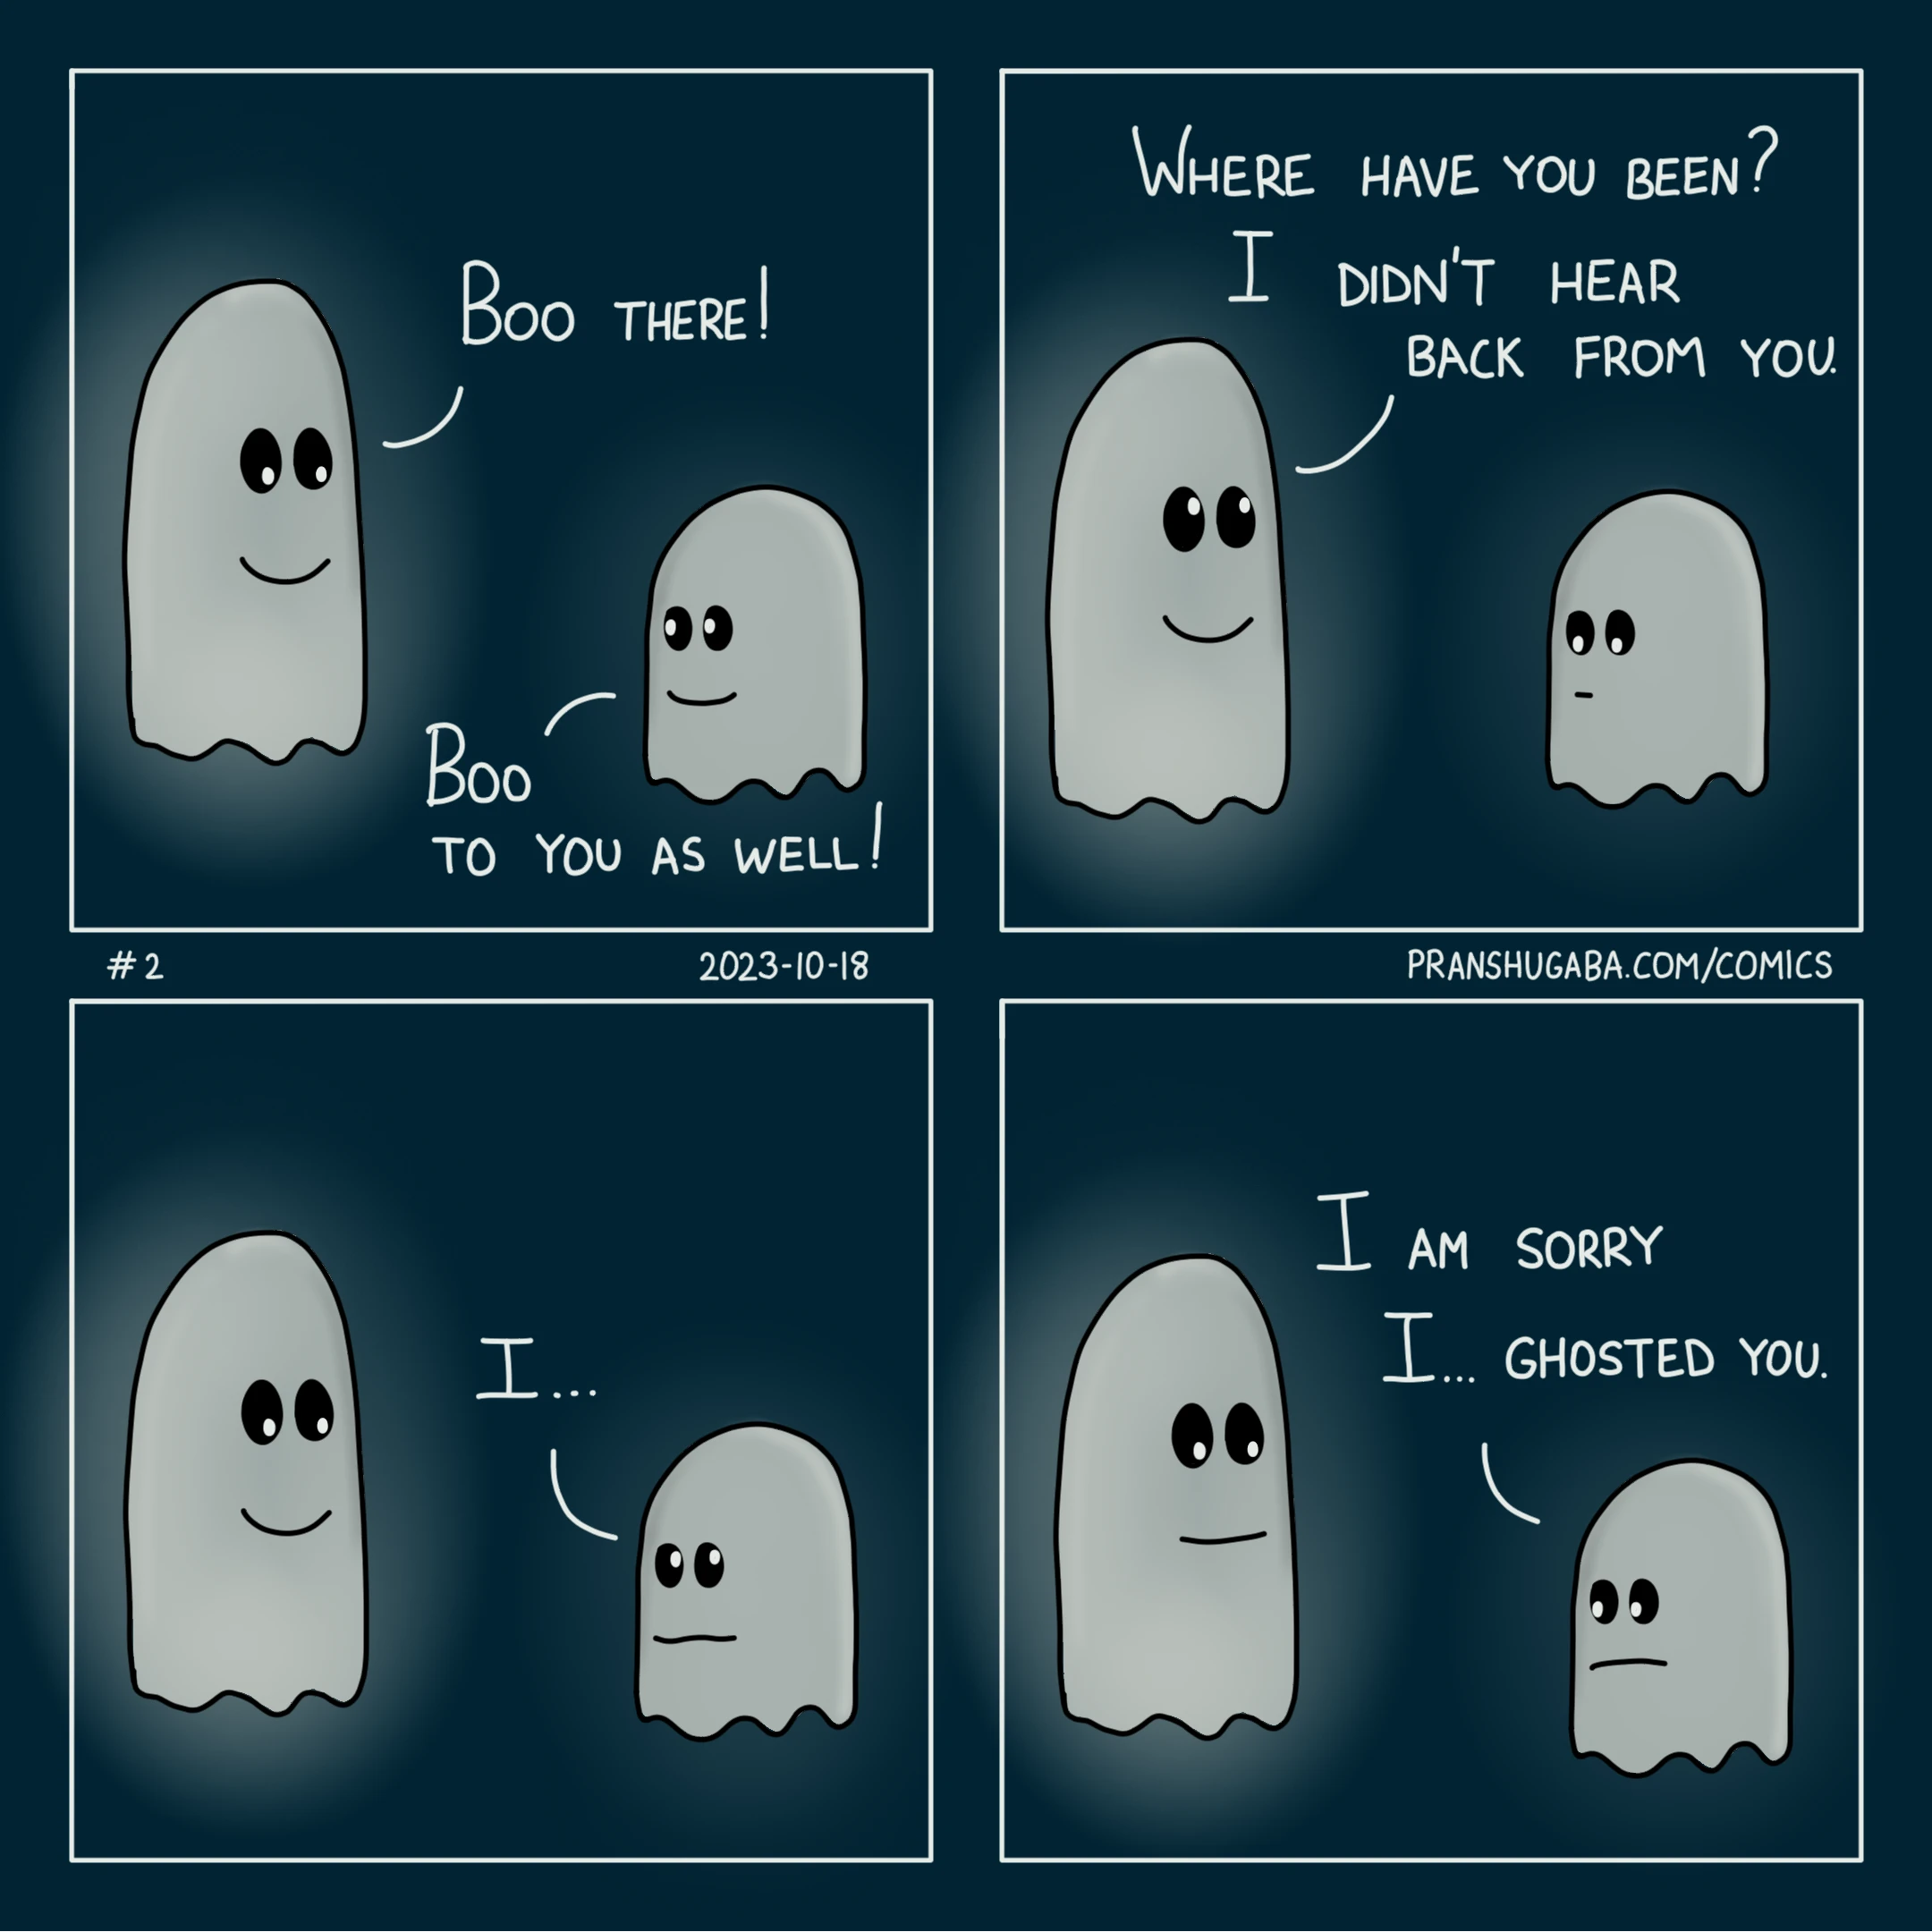 No one likes being ghosted. Not even ghosts.